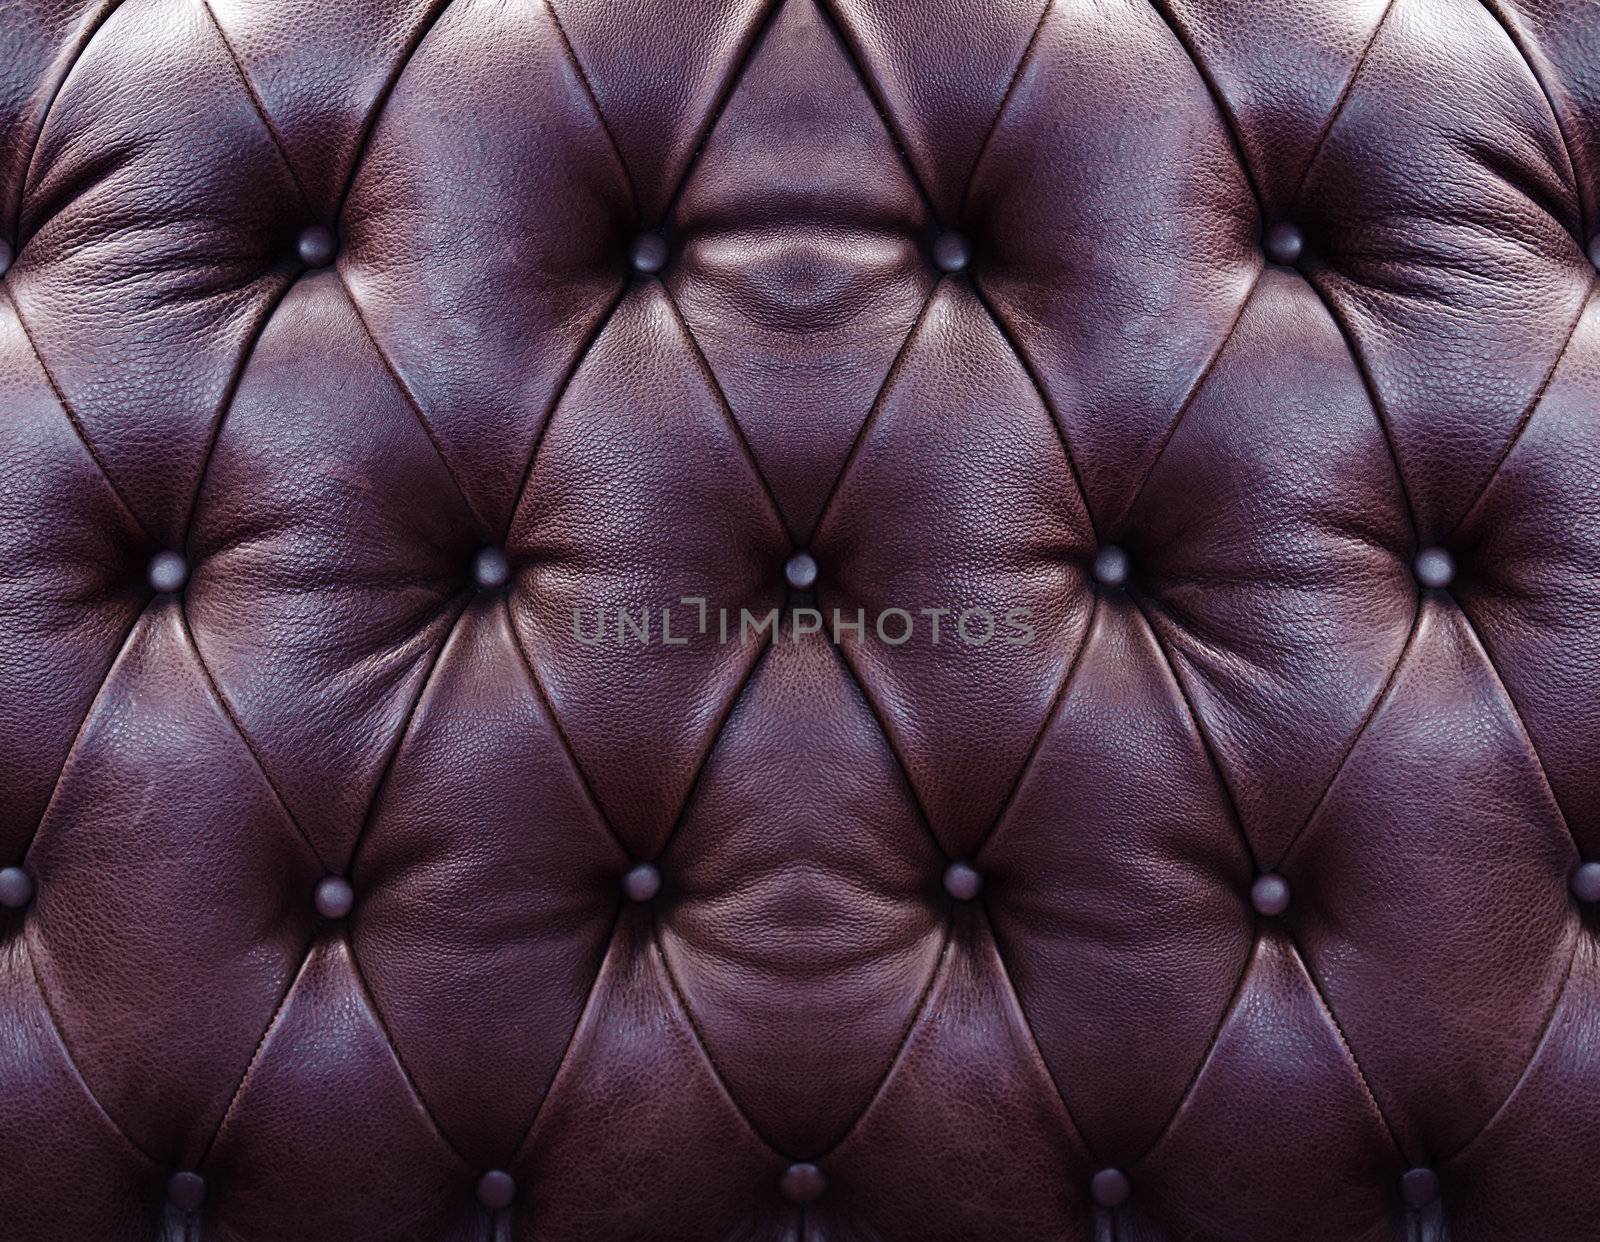 Brown upholstery leather  by stoonn